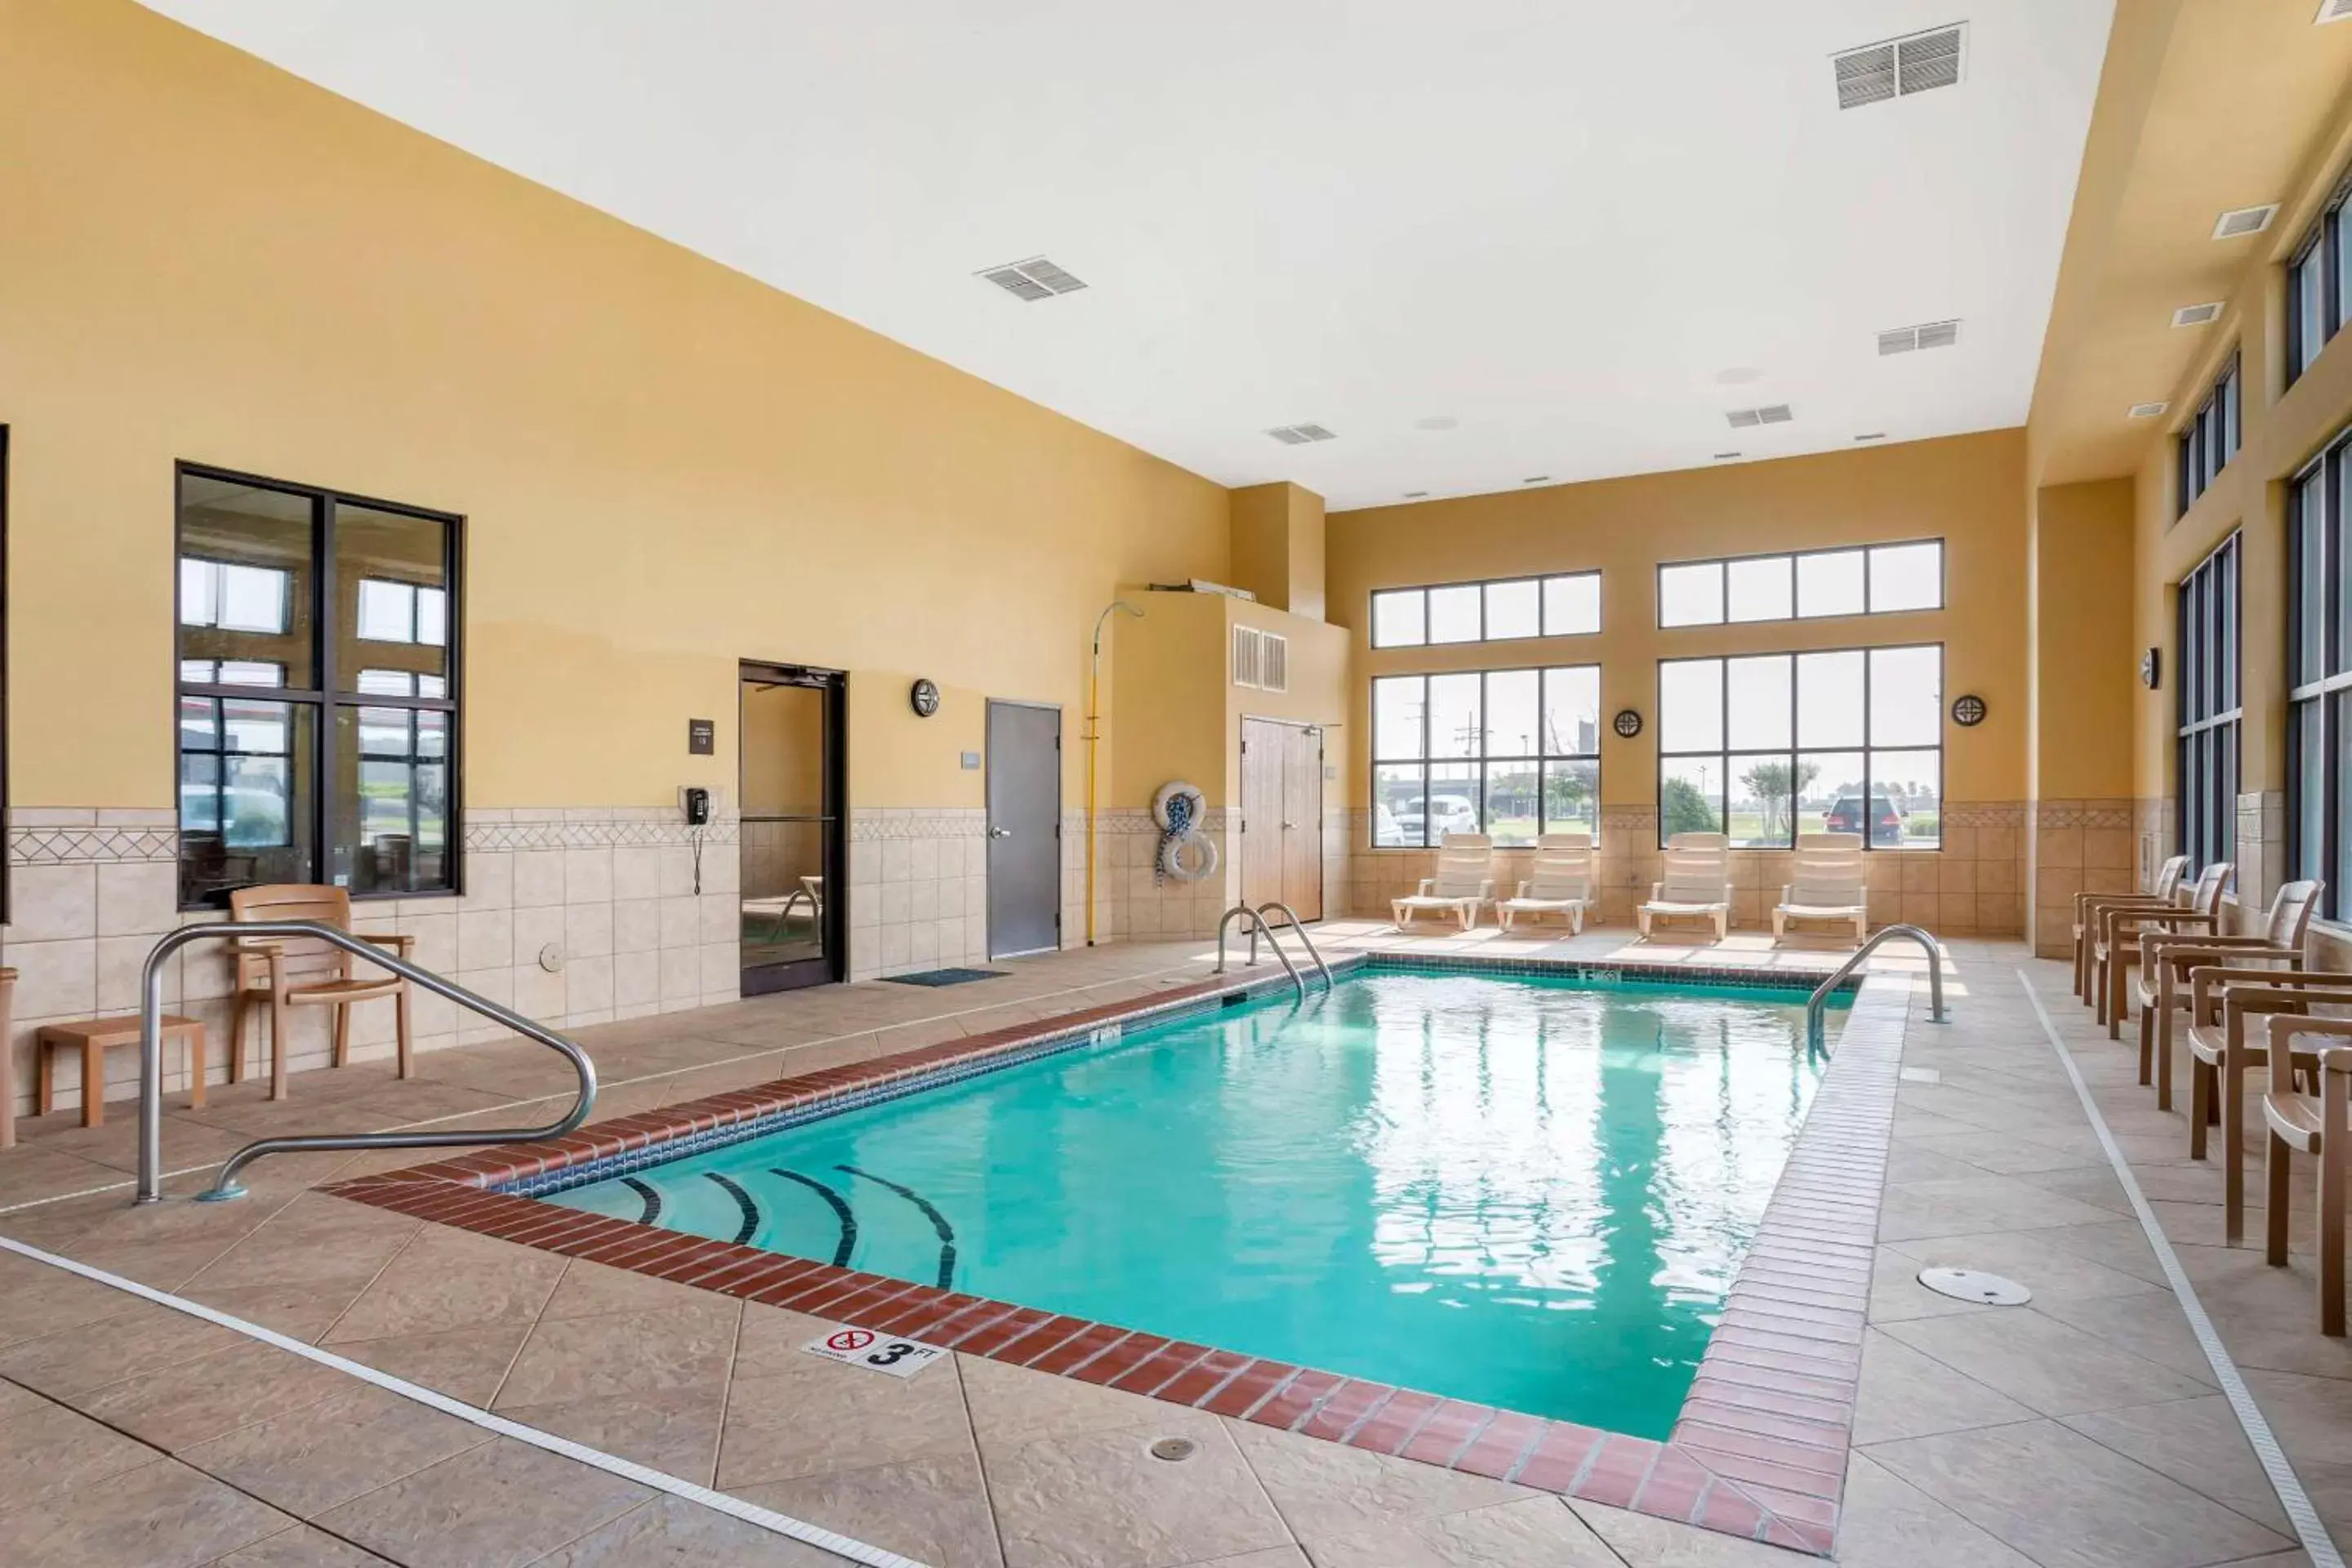 Swimming Pool in Comfort Inn & Suites Blytheville